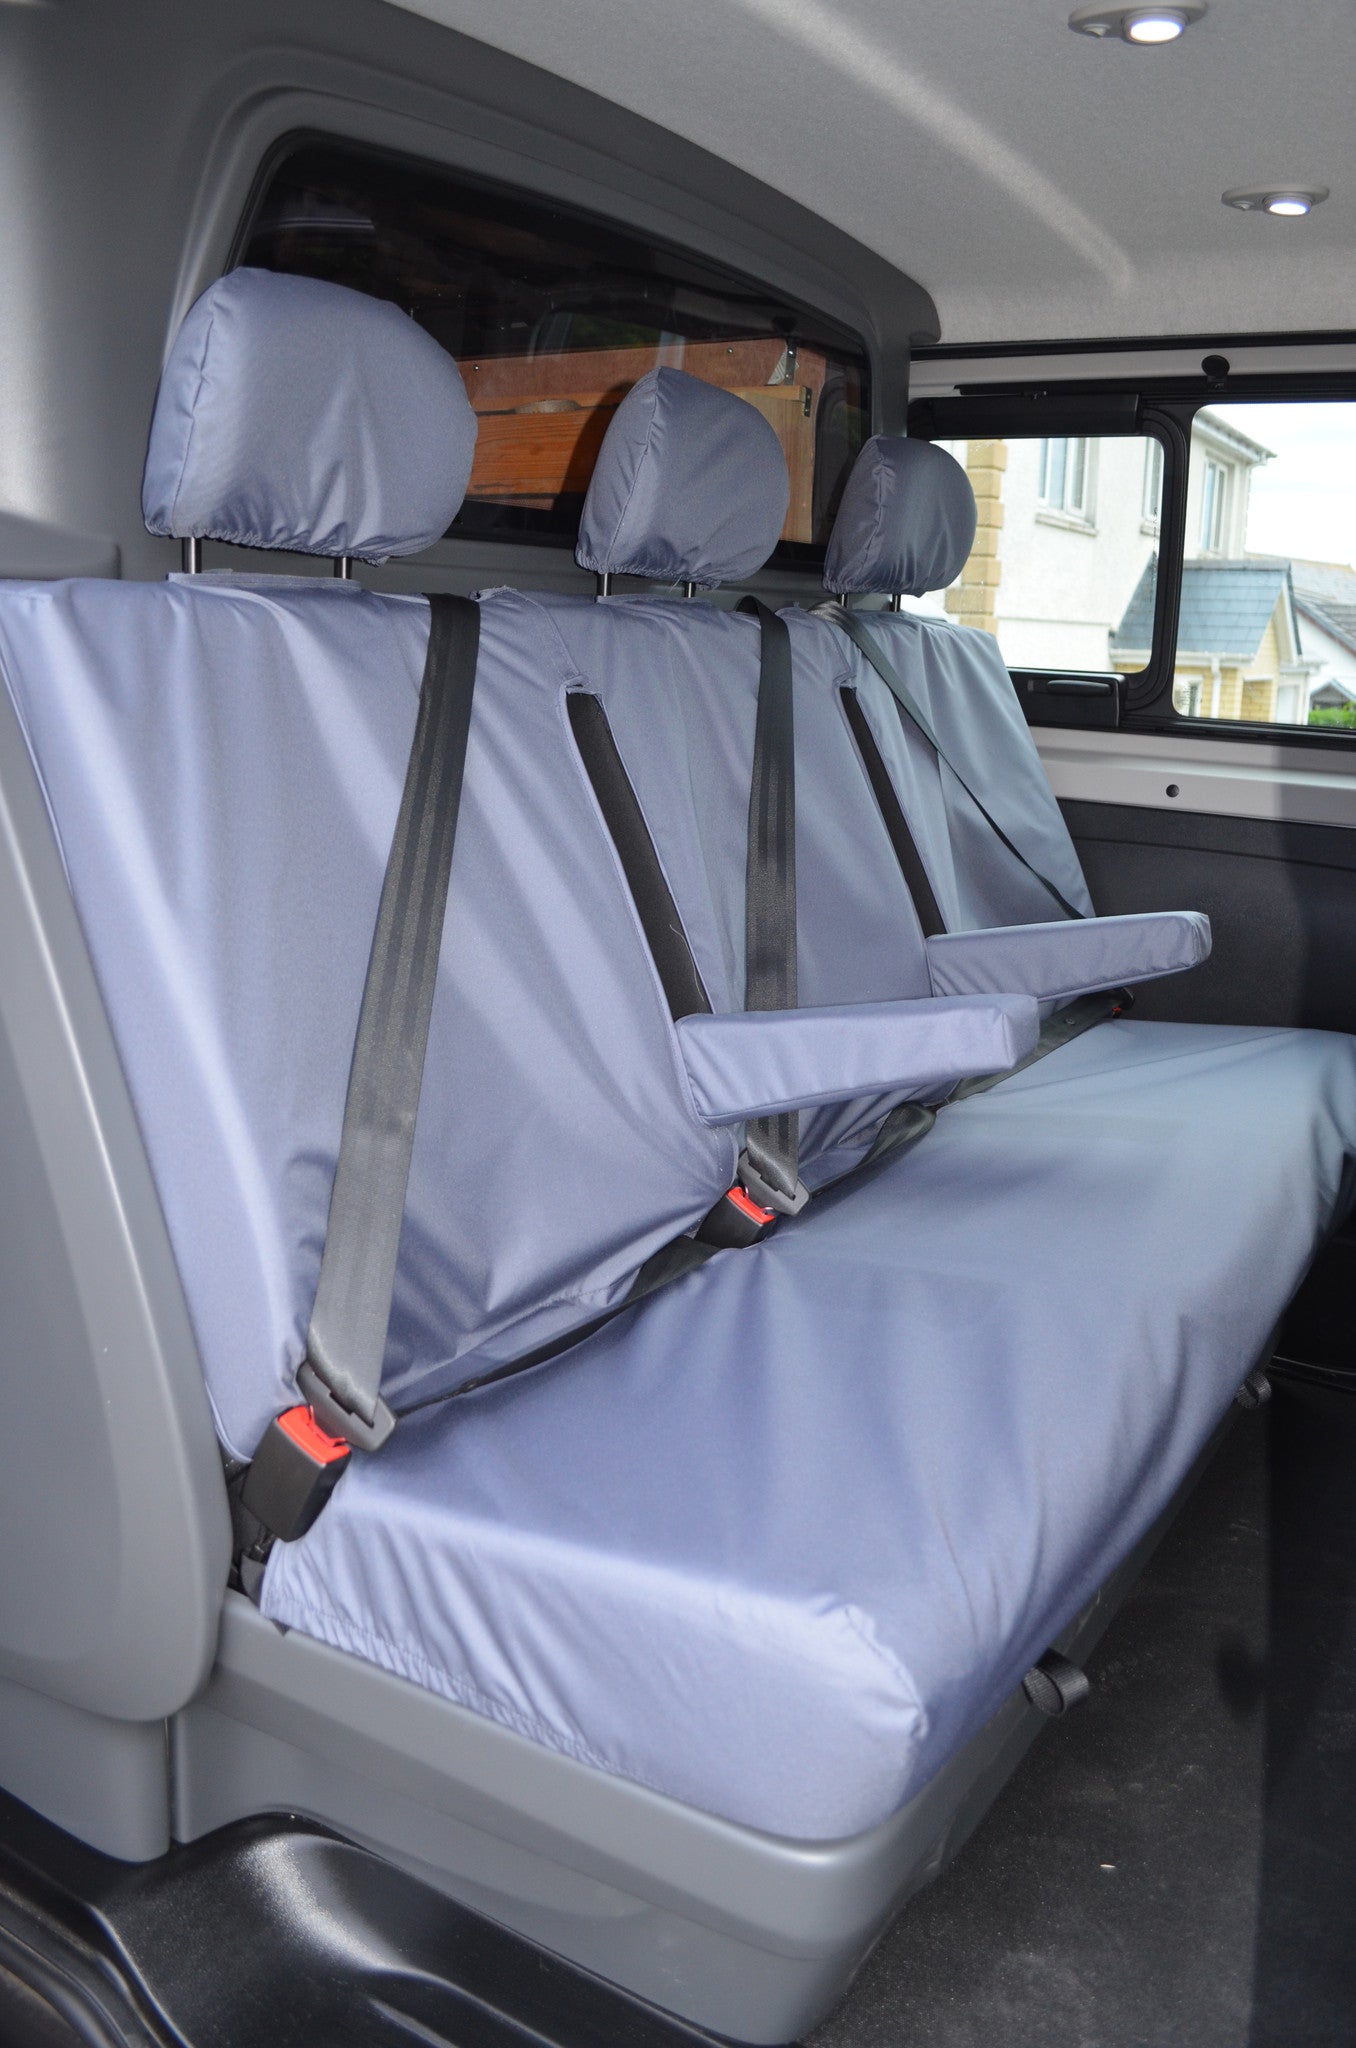 Vauxhall Vivaro Sportive Double Cab 2014-2019 Tailored Rear Seat Covers  Turtle Covers Ltd